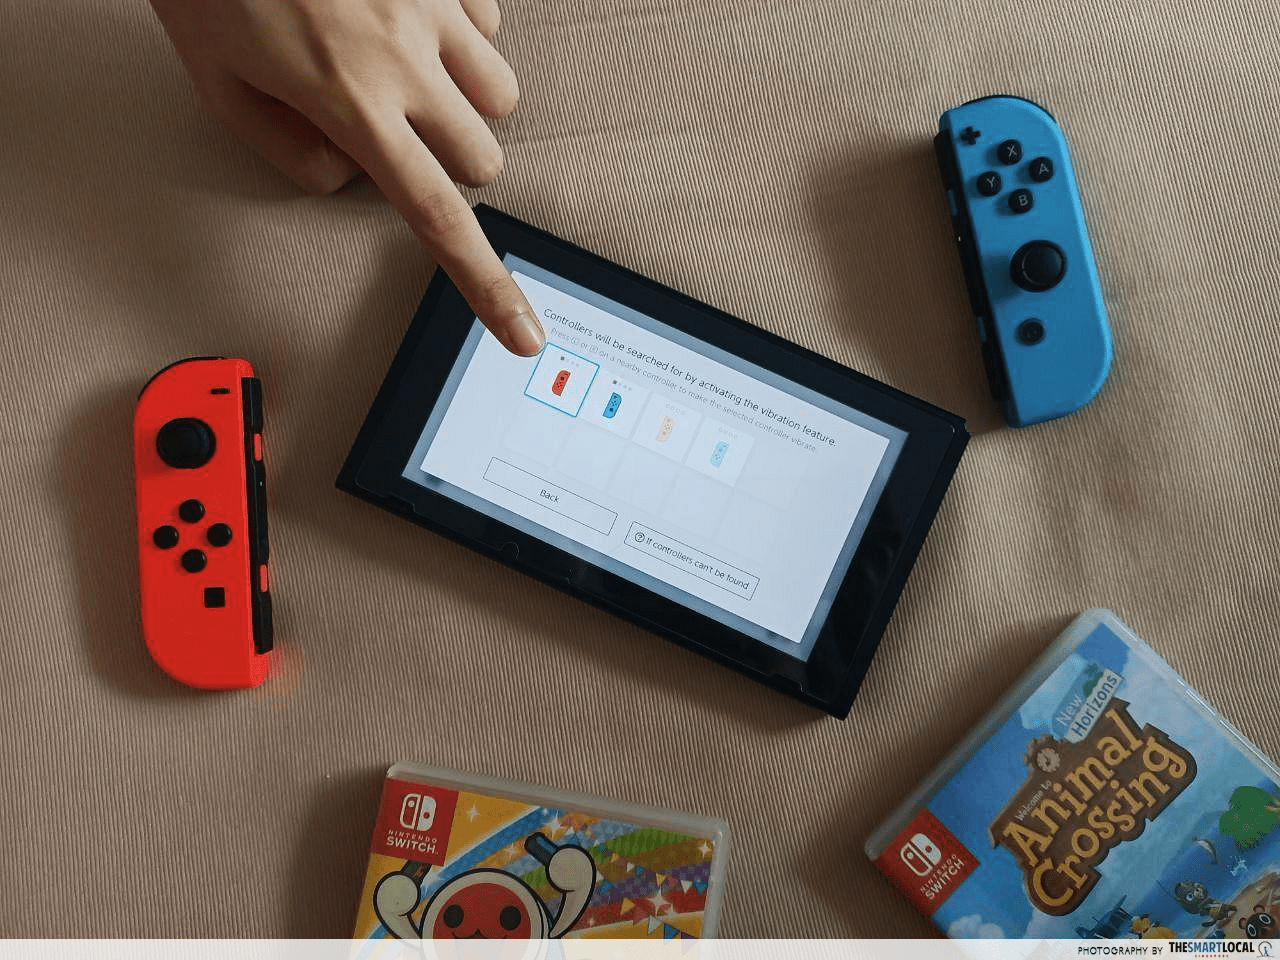 9 Nintendo Switch Save Money & Make Most Out Of Device